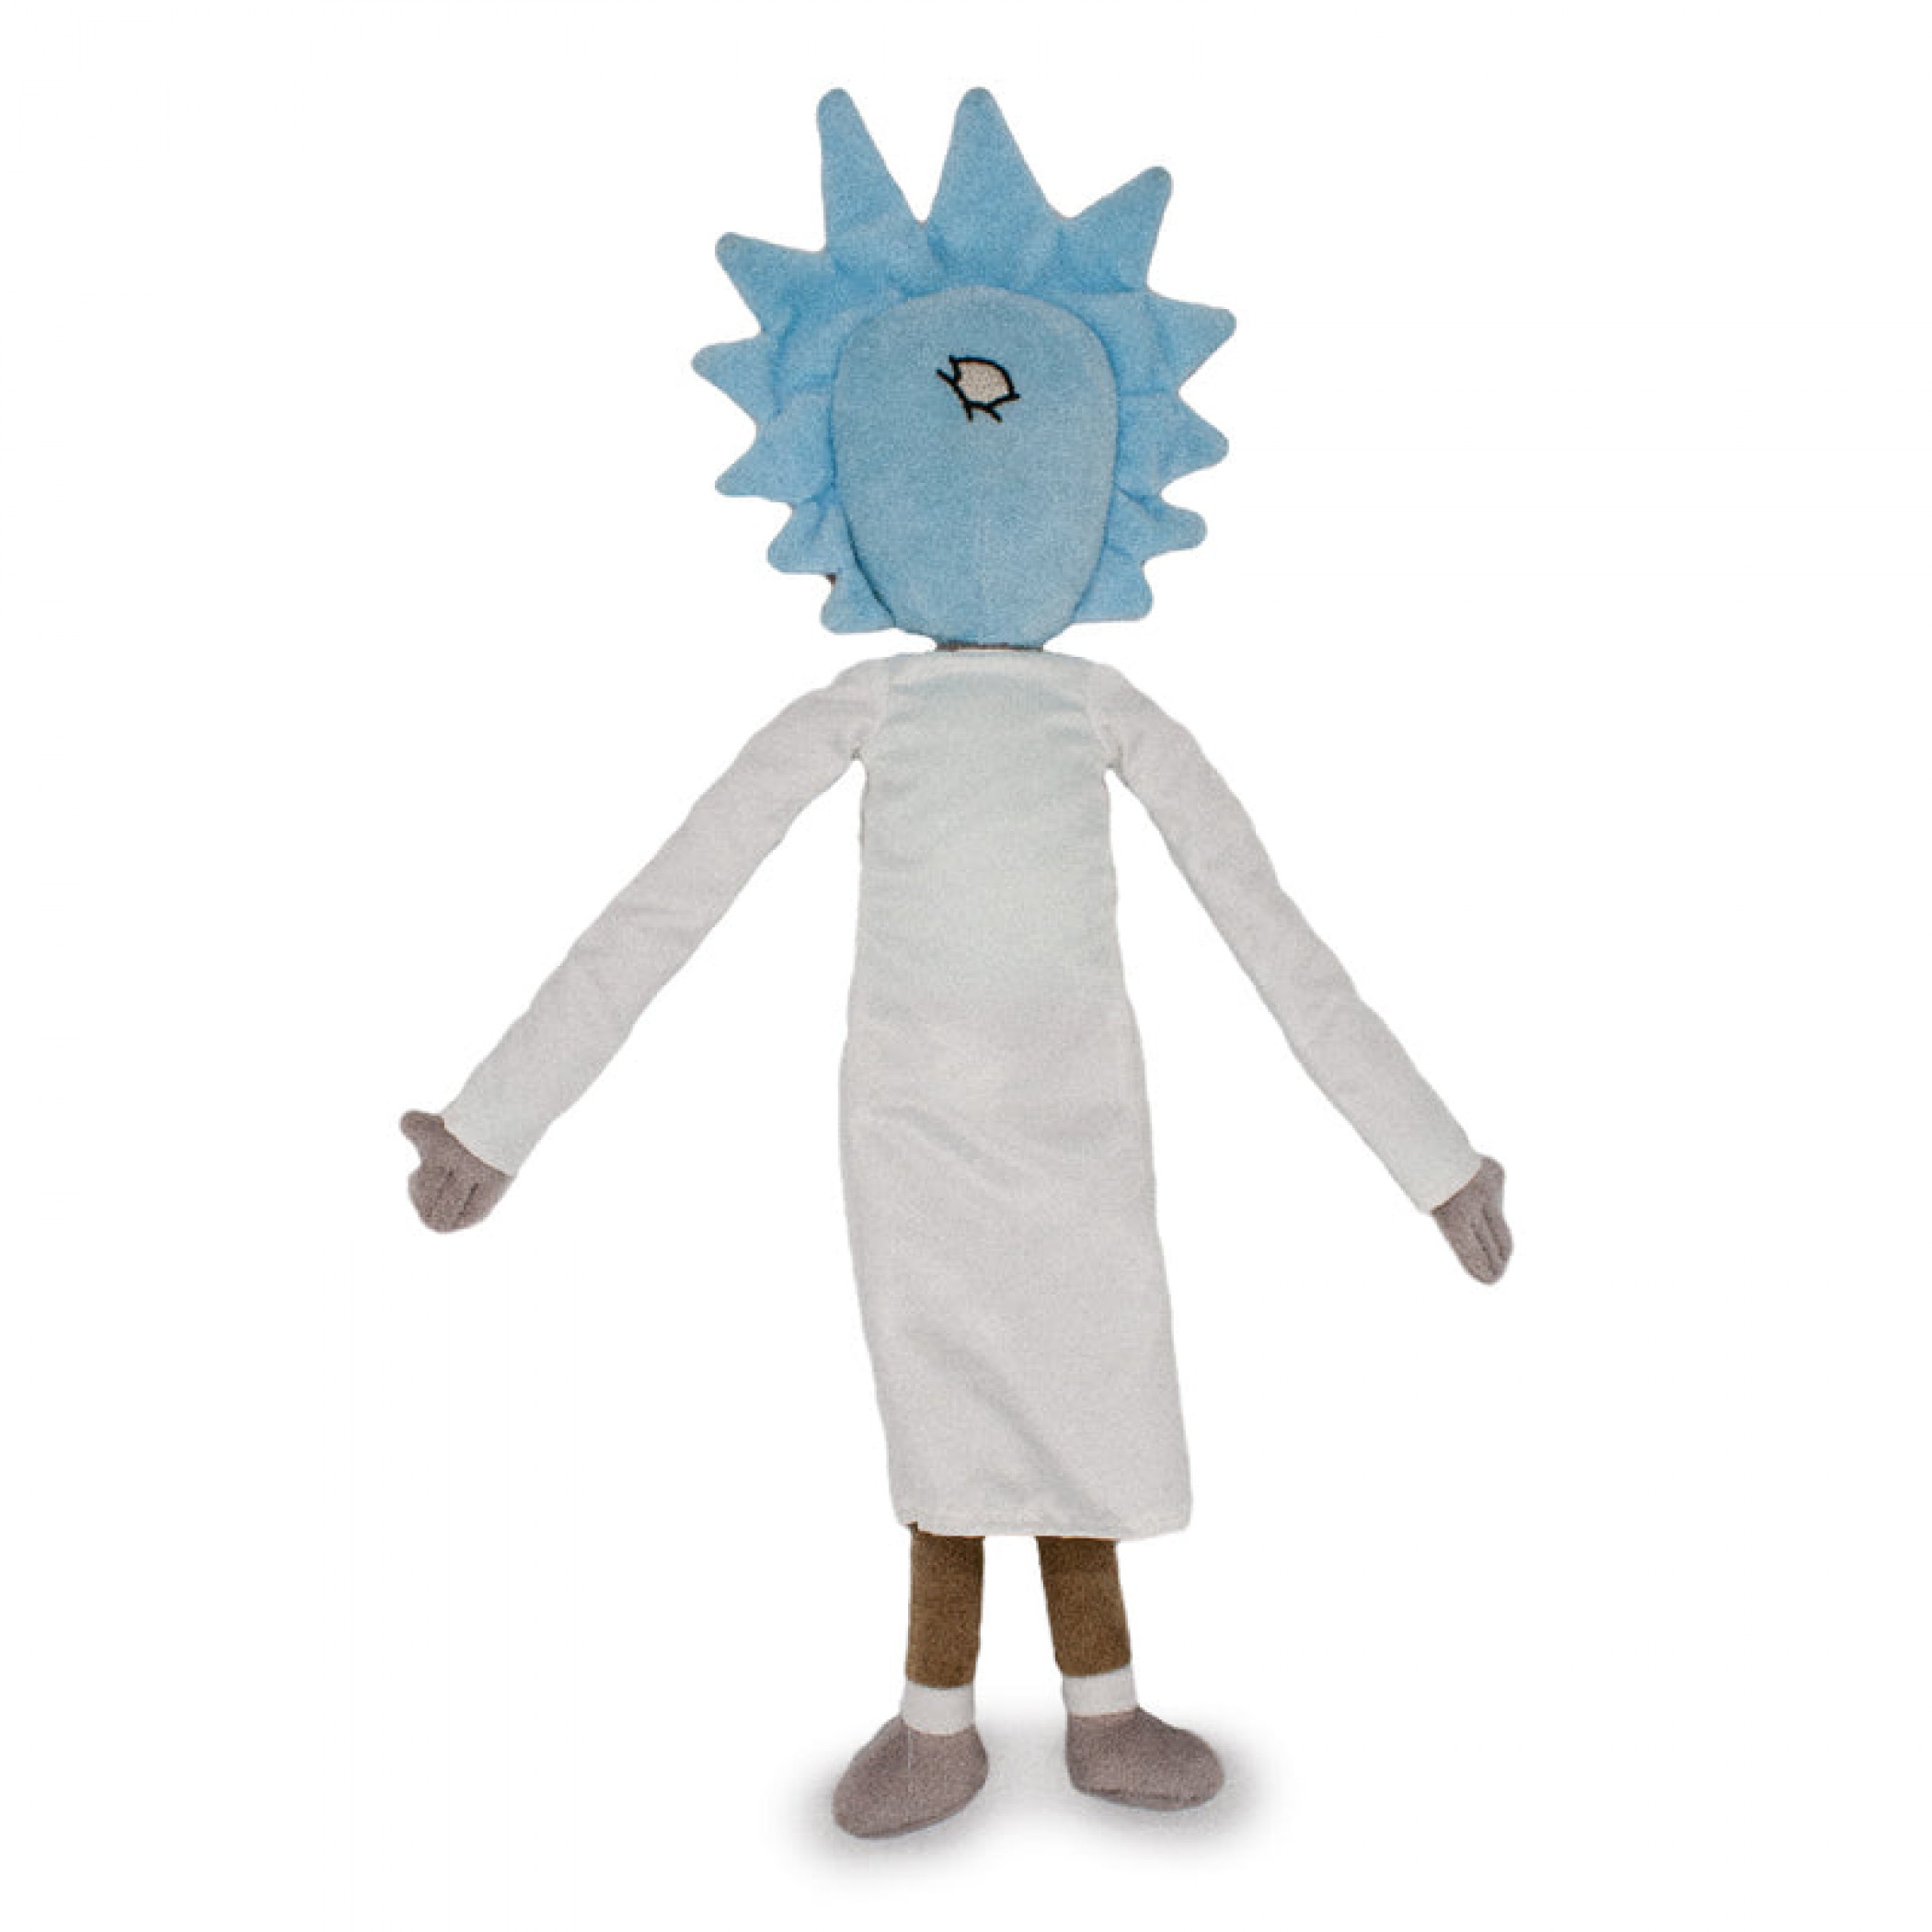 Rick and Morty Rick Sanchez Standing Pose Plush Squeaky Dog Toy